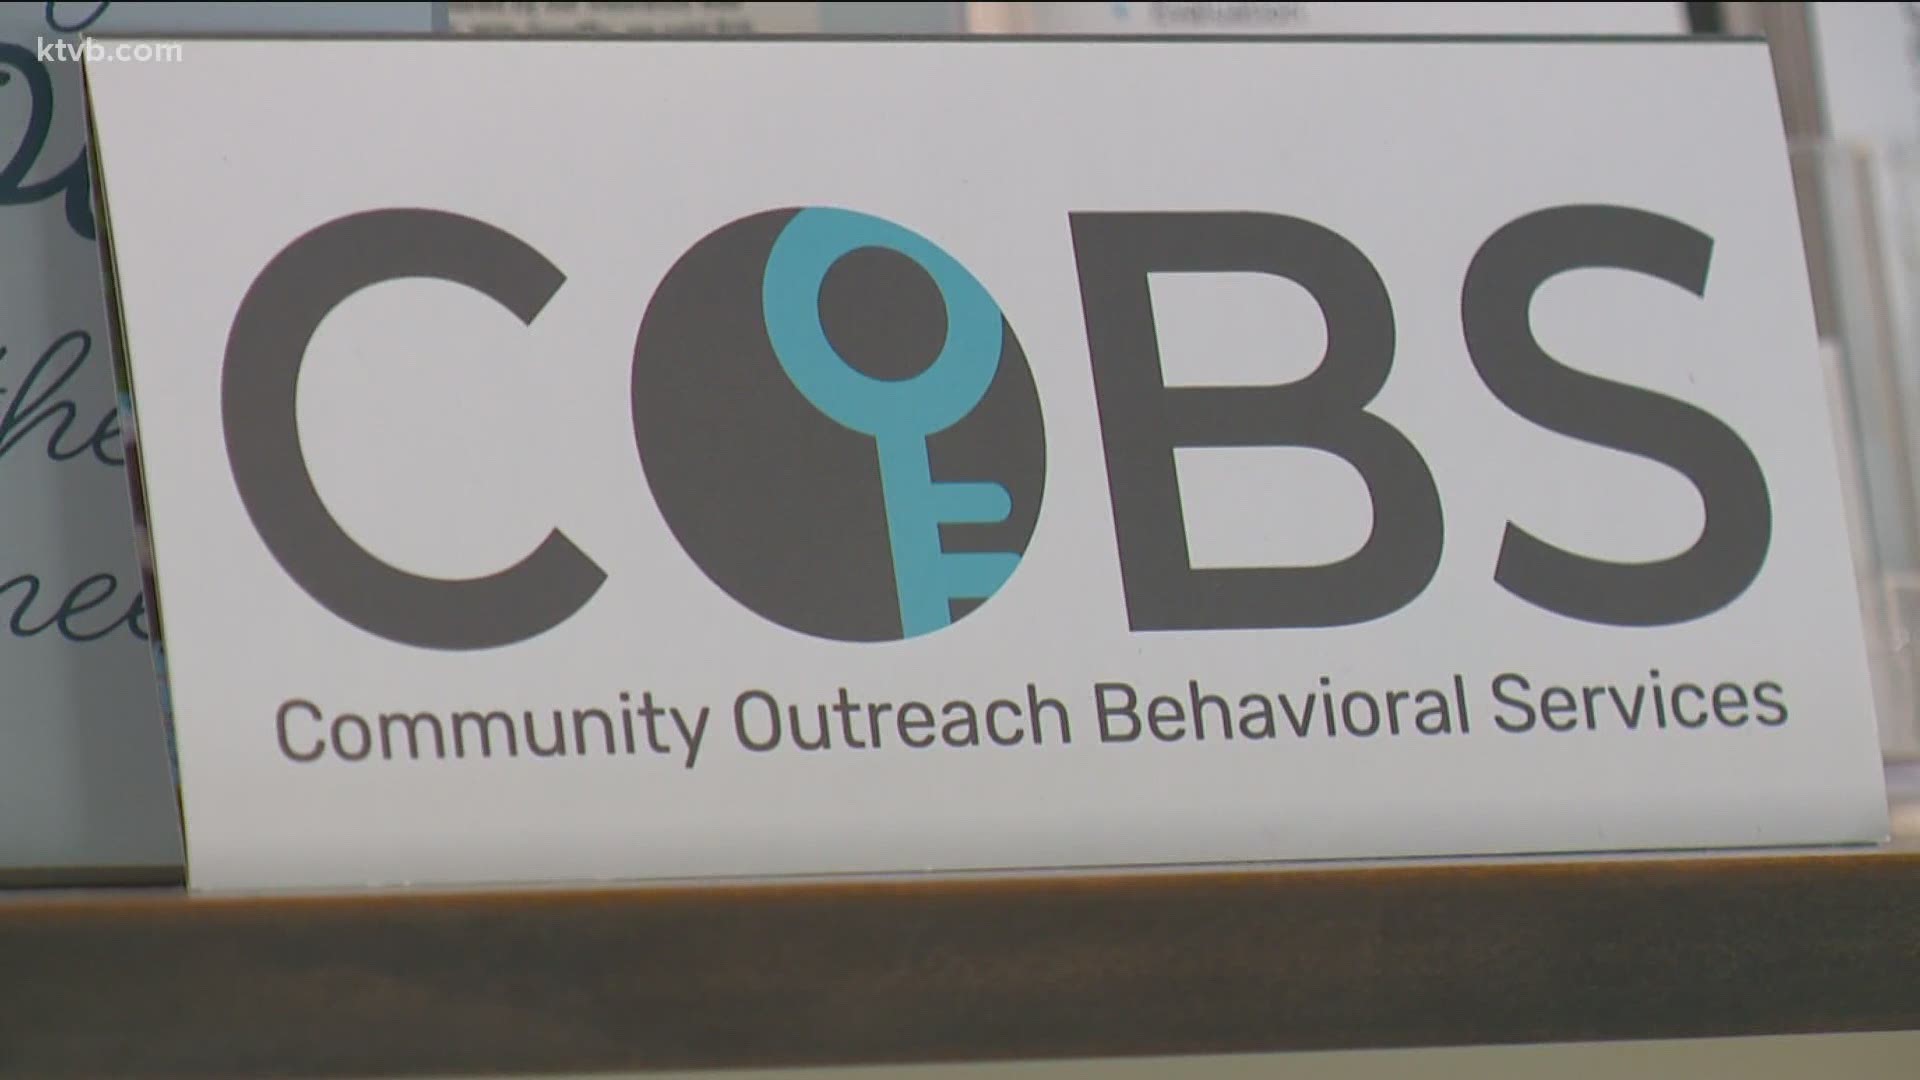 Human sex trafficking occurs in every state, including Idaho. Community Outreach Behavioral Services (COBS) works to rescue and serve local victims.